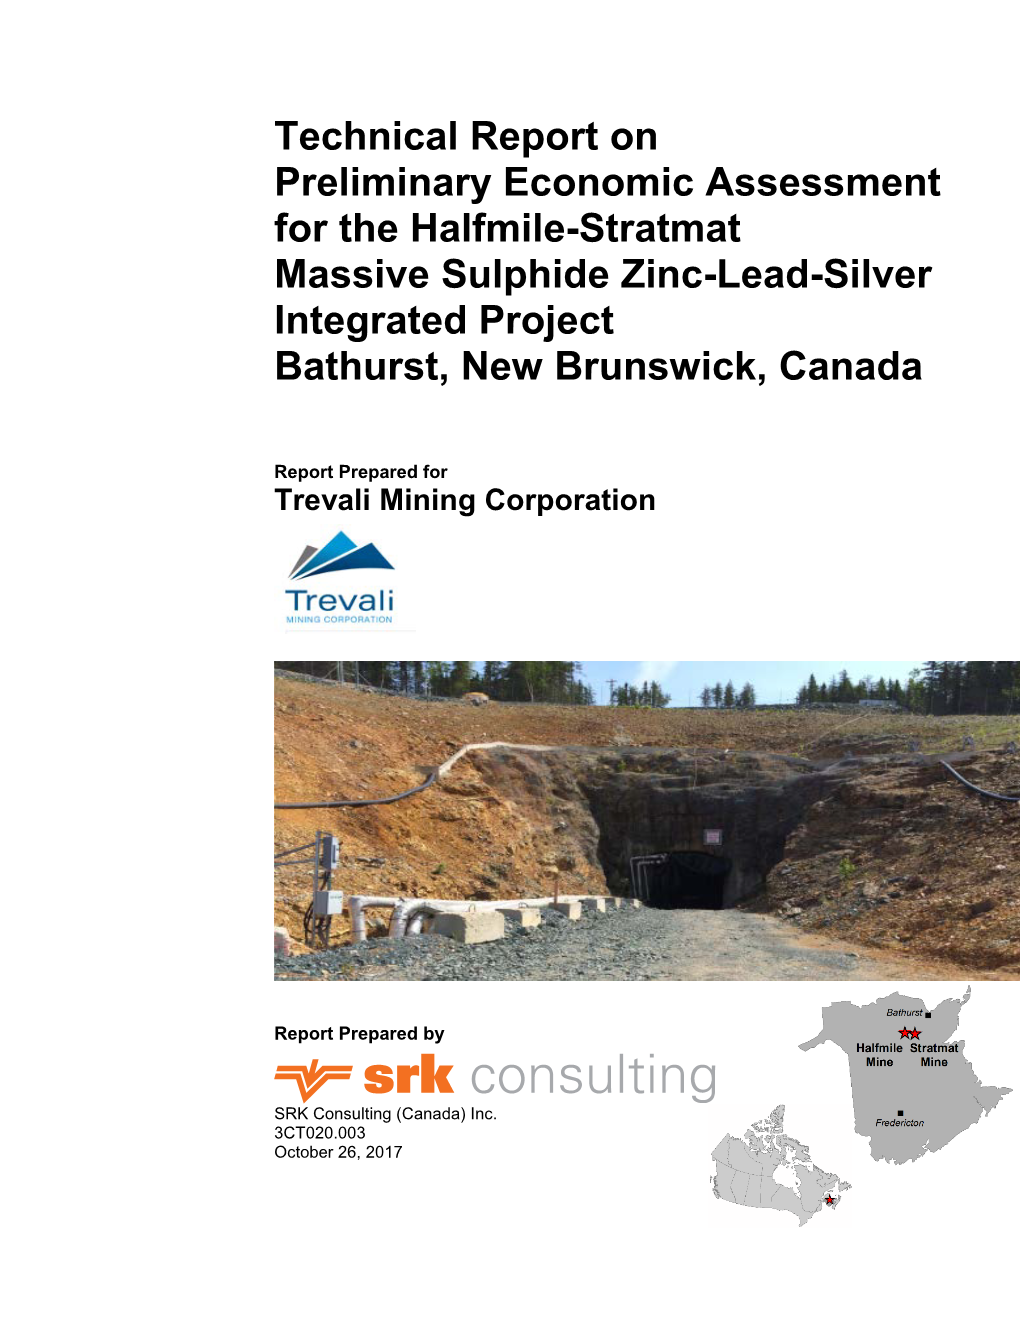 Technical Report on Preliminary Economic Assessment for the Halfmile-Stratmat